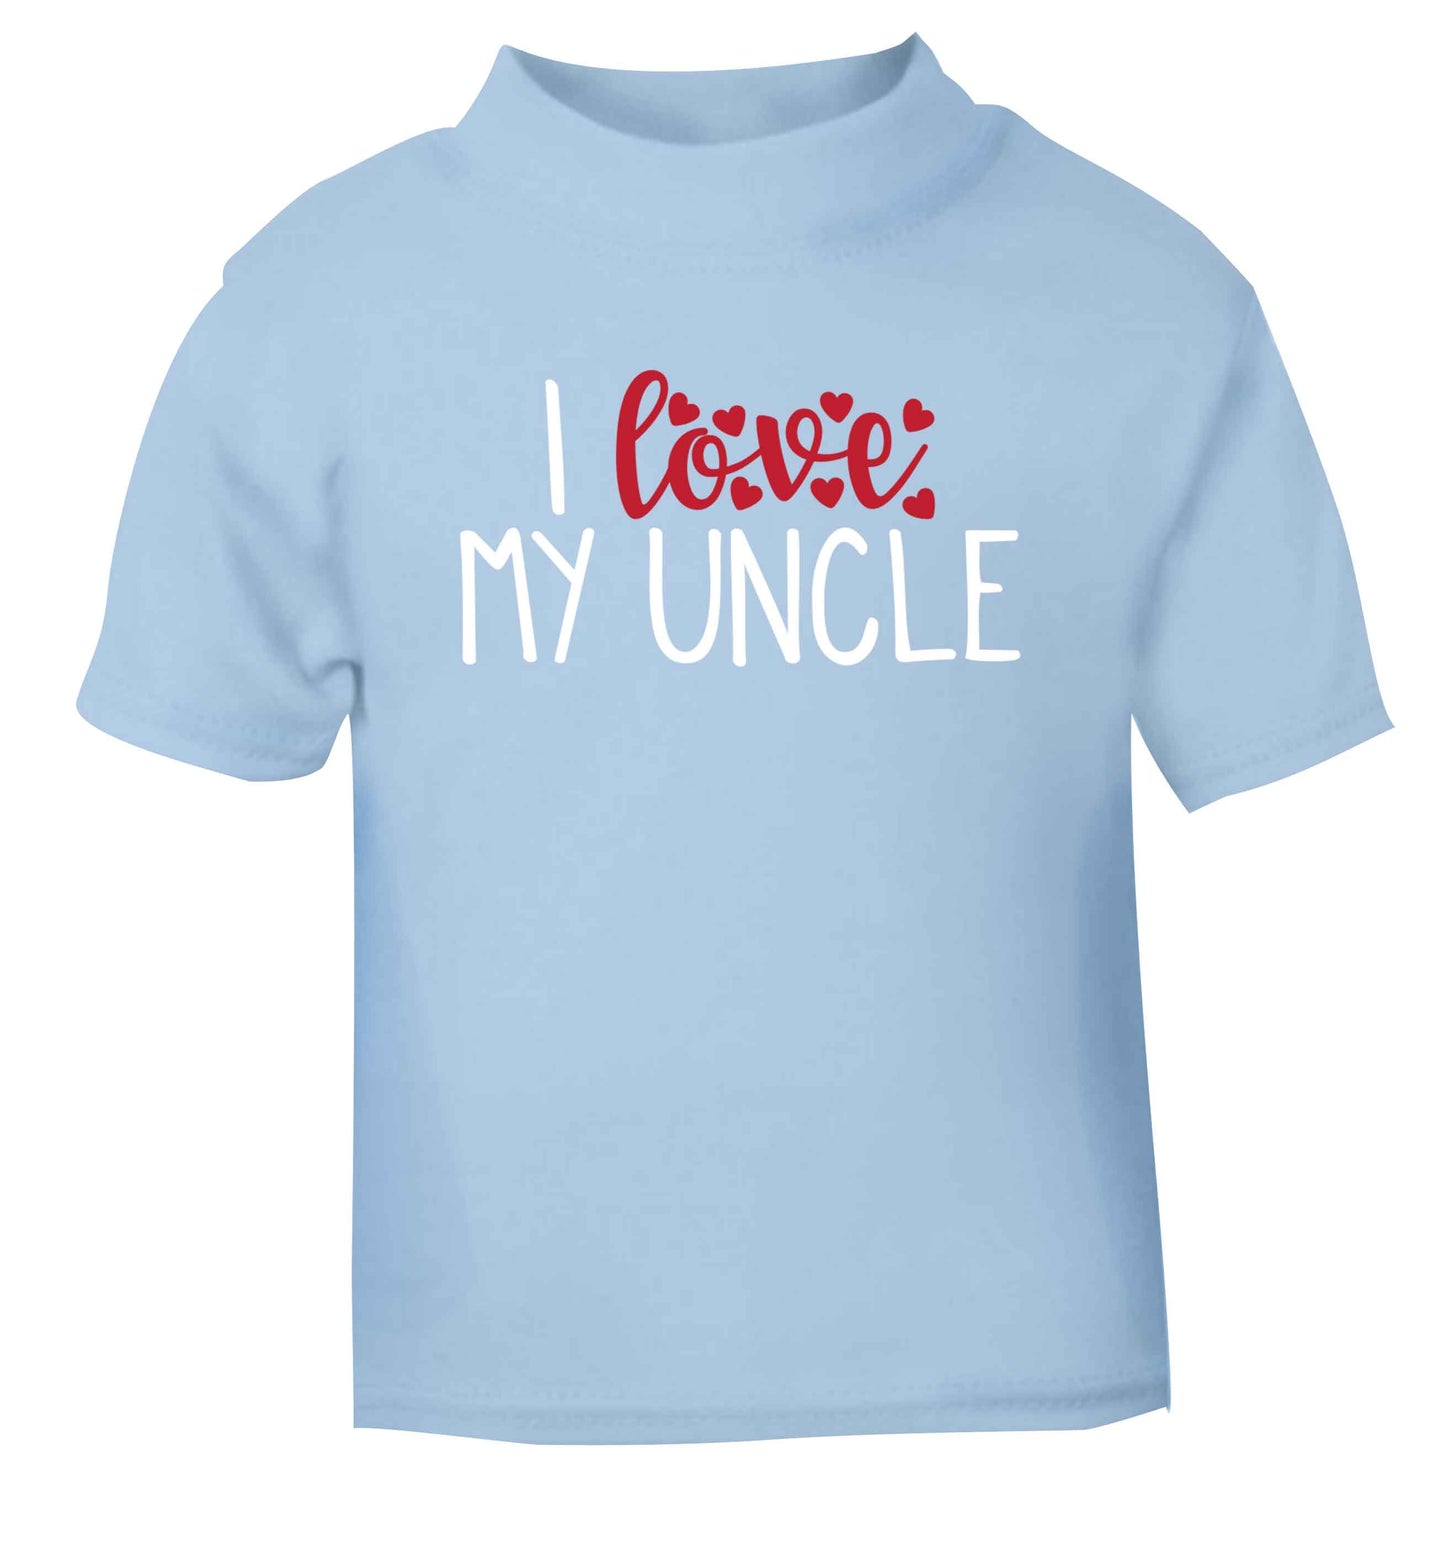 I love my uncle light blue Baby Toddler Tshirt 2 Years